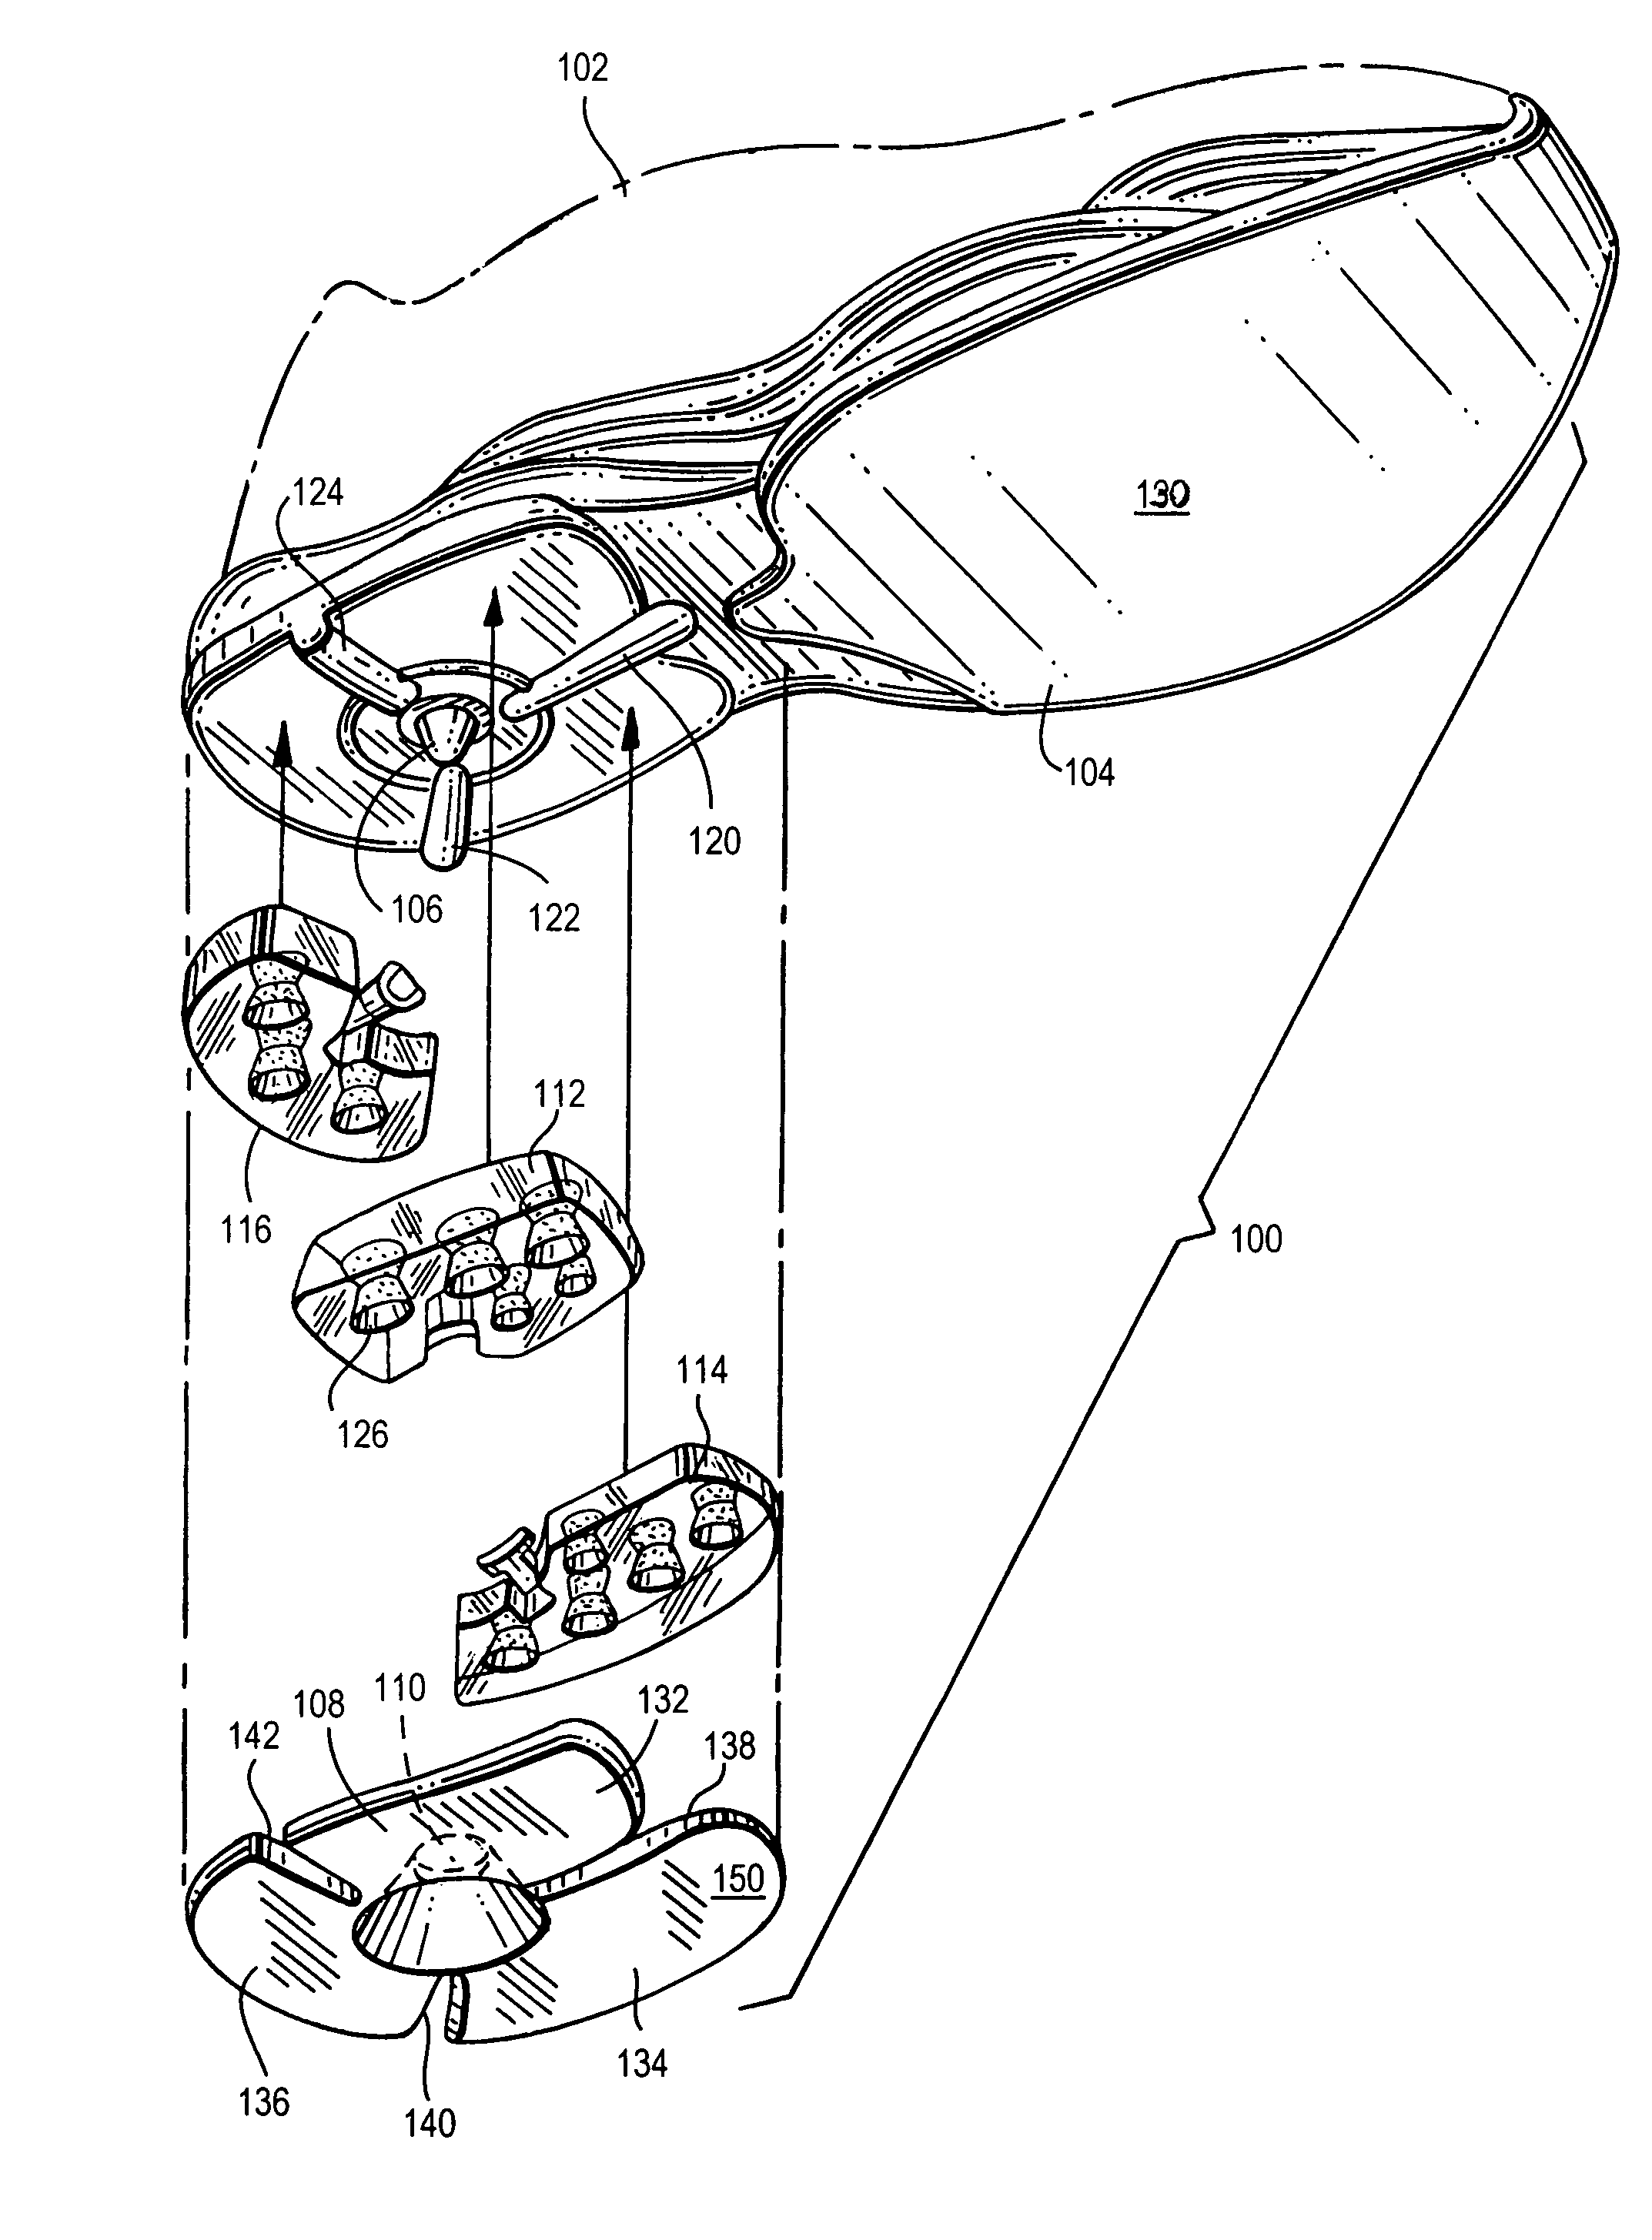 Shoe heel assembly and method